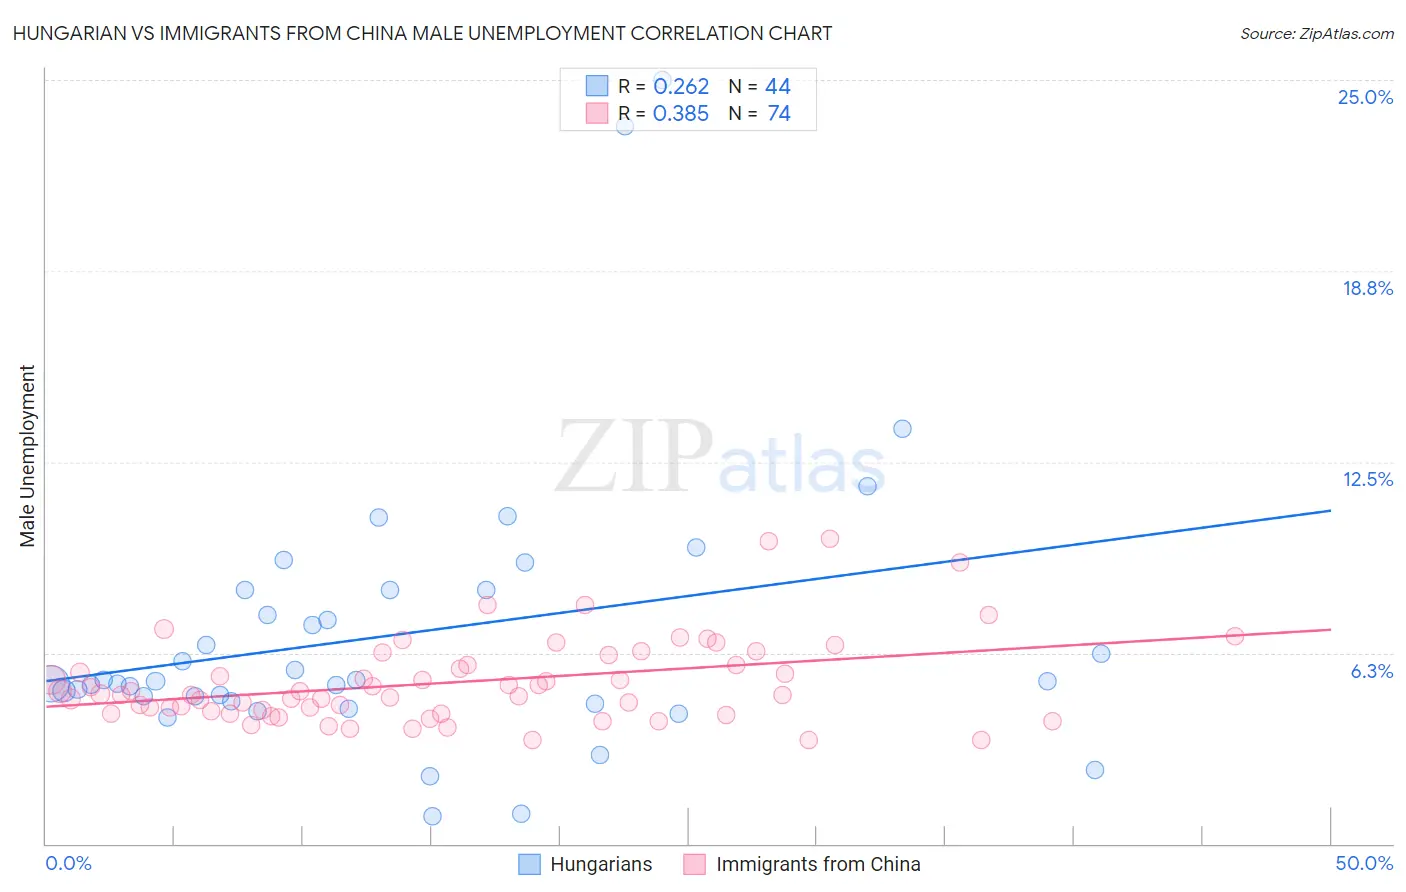 Hungarian vs Immigrants from China Male Unemployment